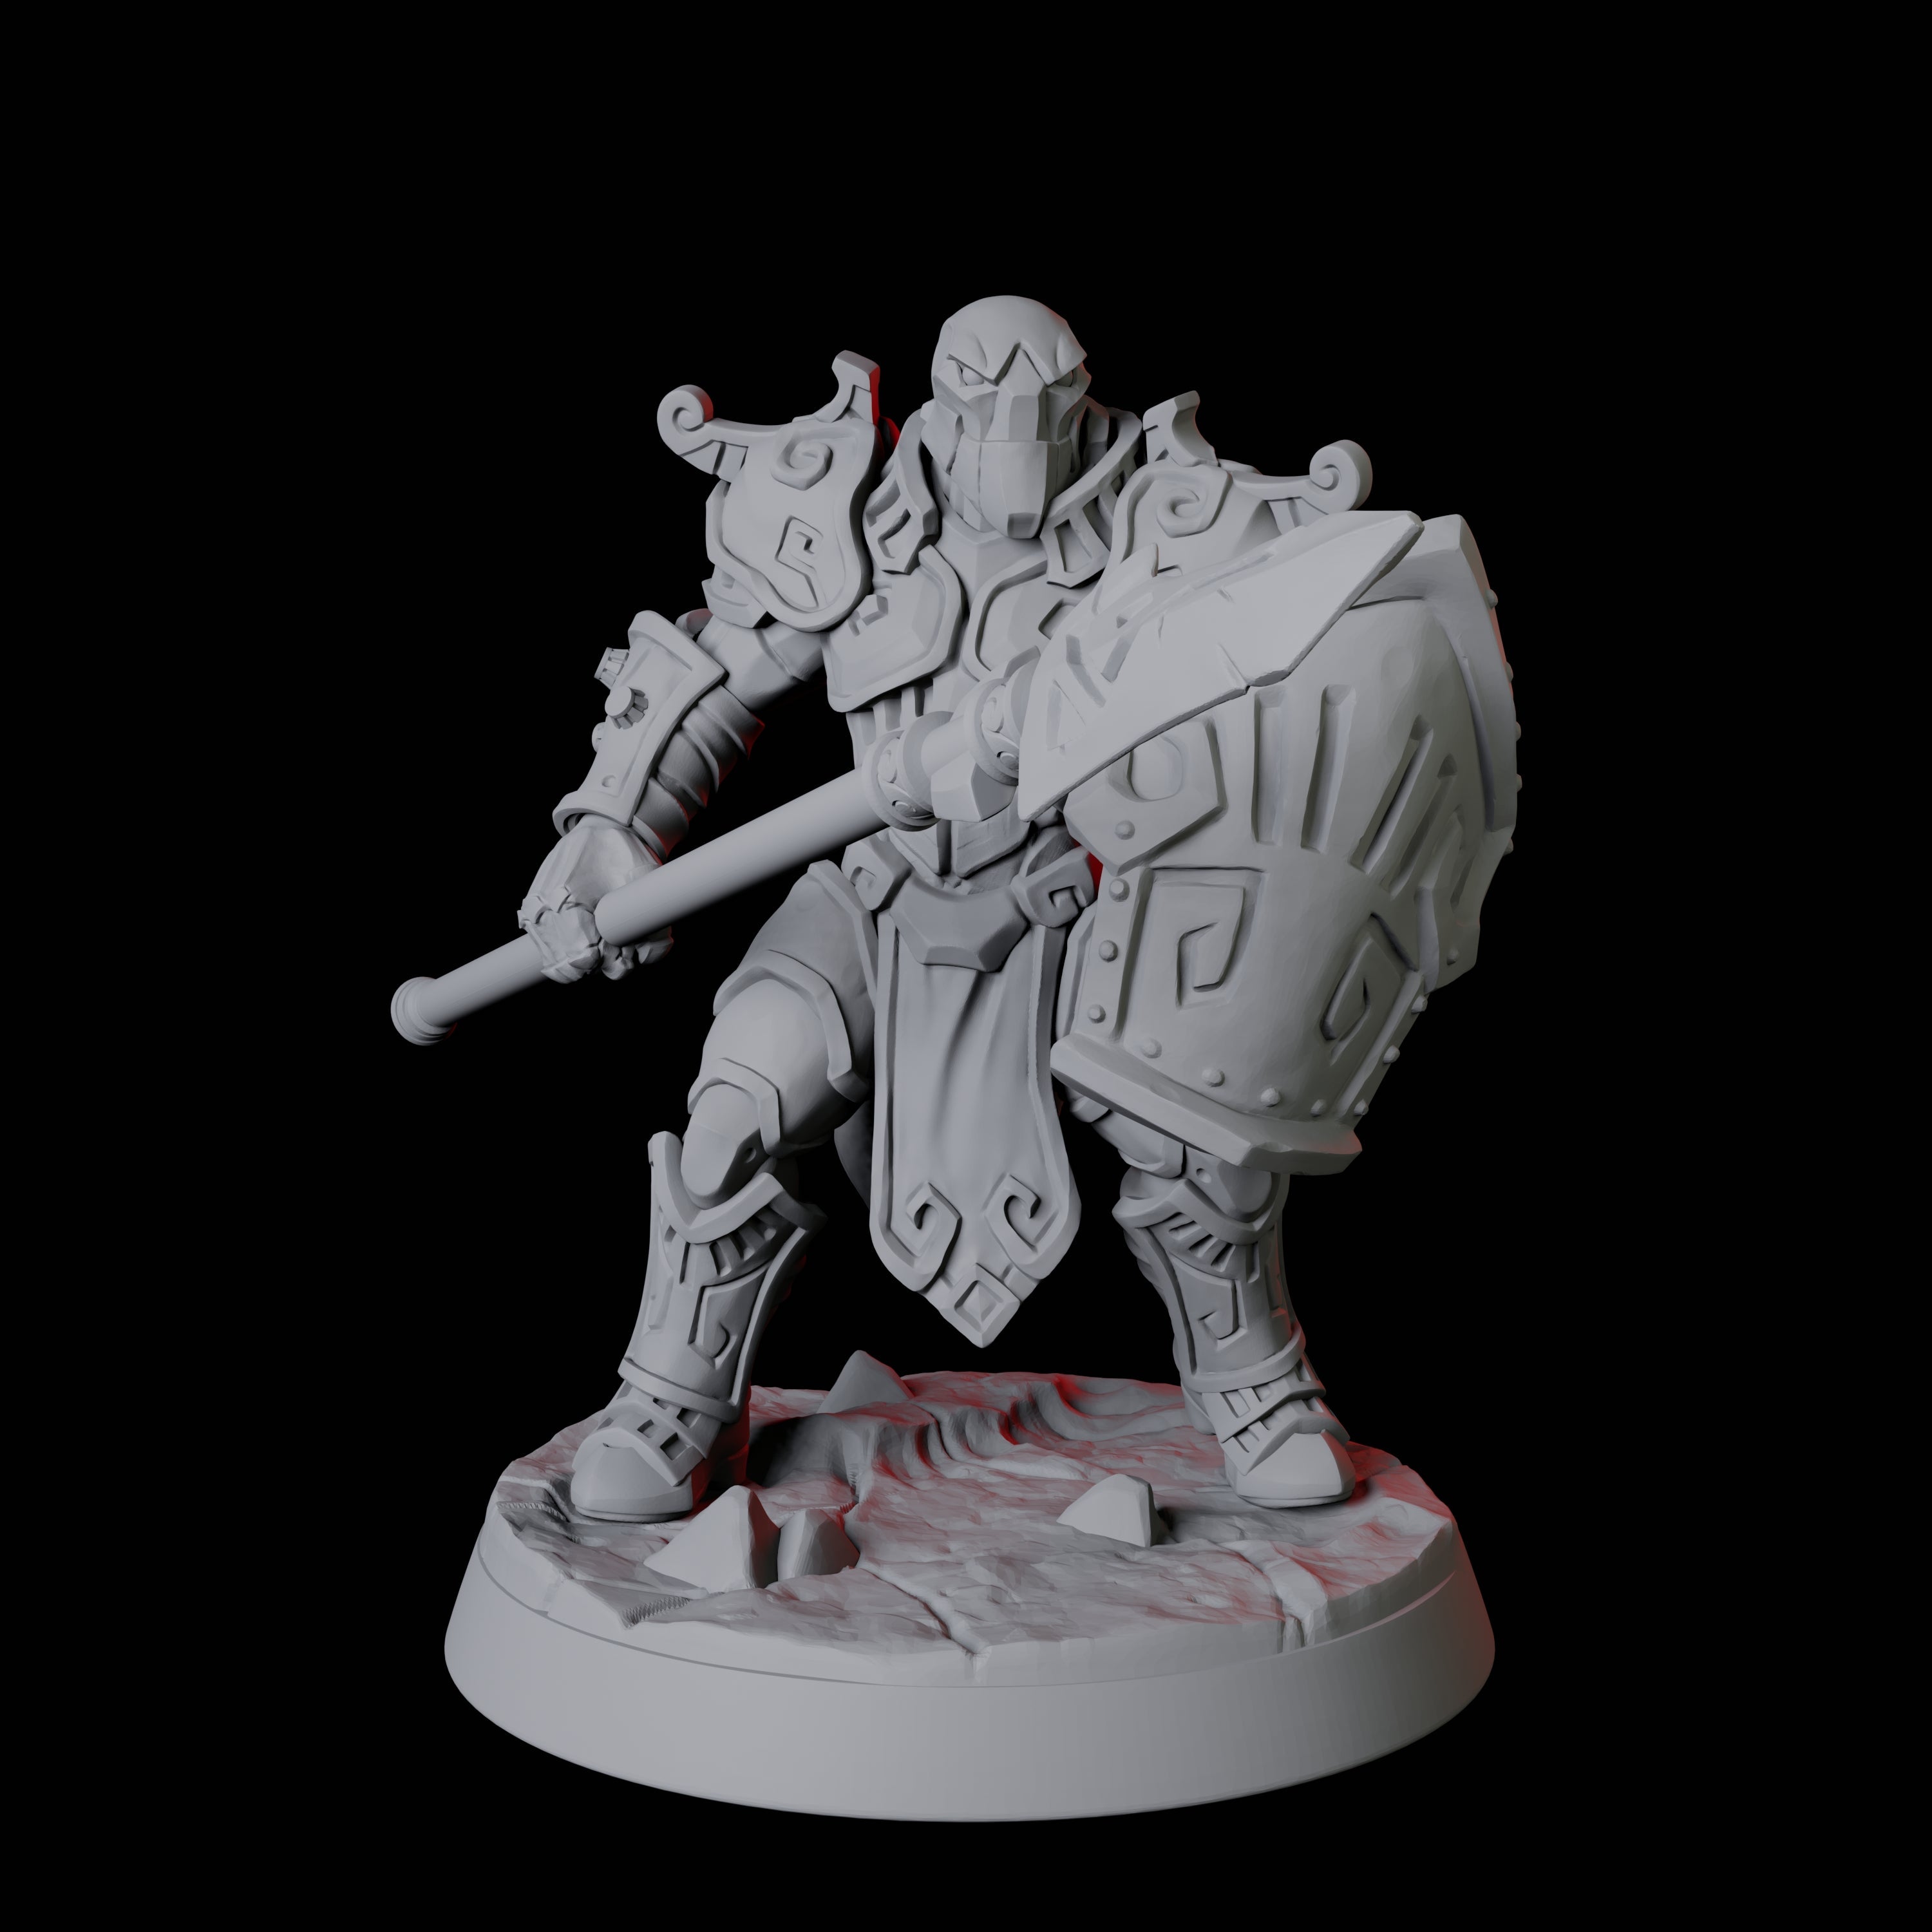 Battle-Ready Warforged B Miniature for Dungeons and Dragons, Pathfinder or other TTRPGs